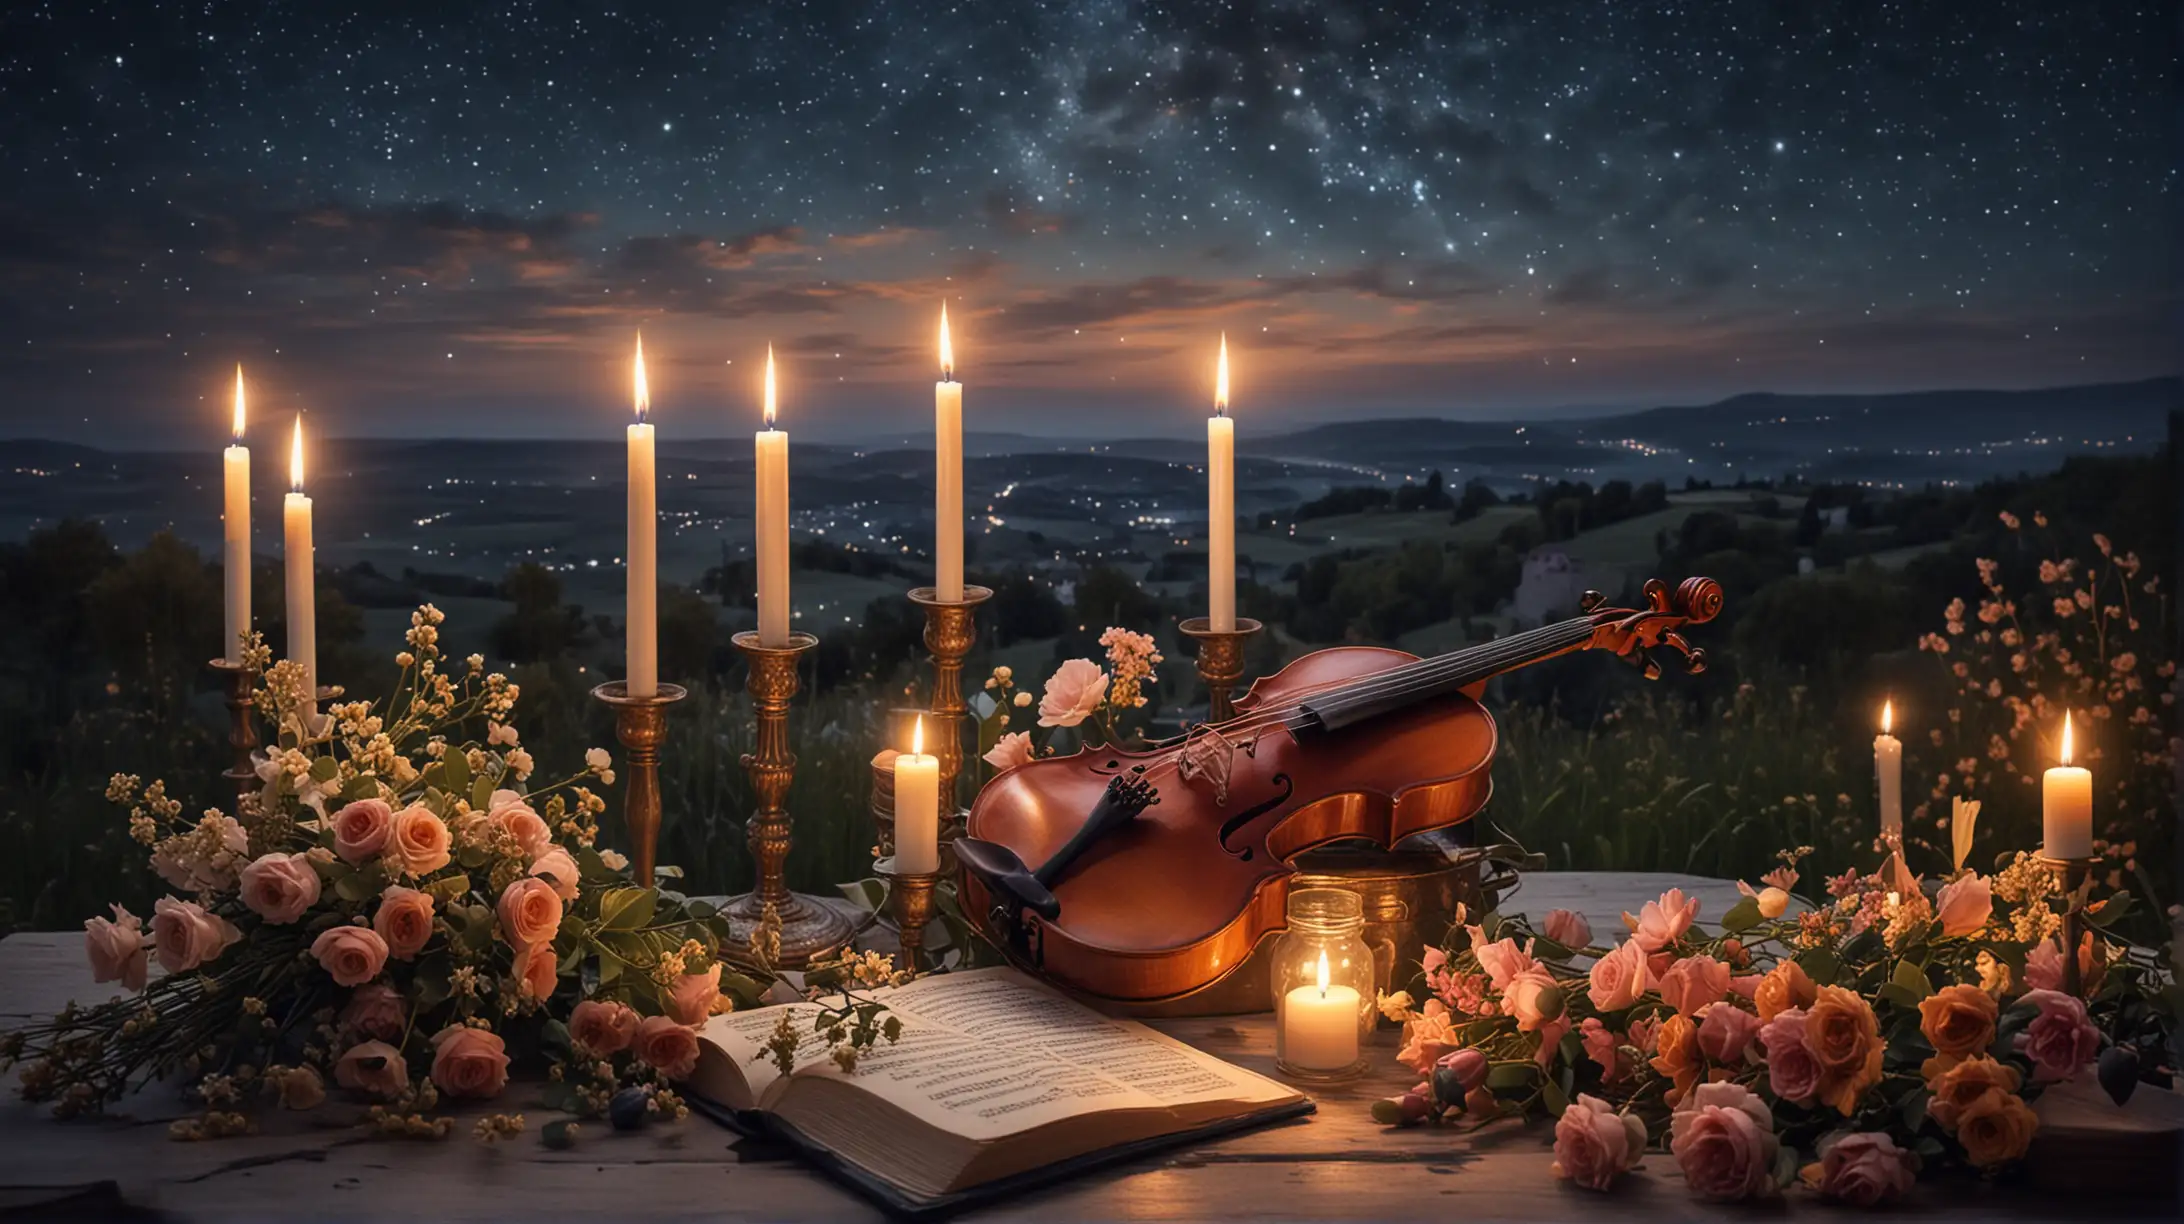 Evening, starry sky, candles, violin, flowers